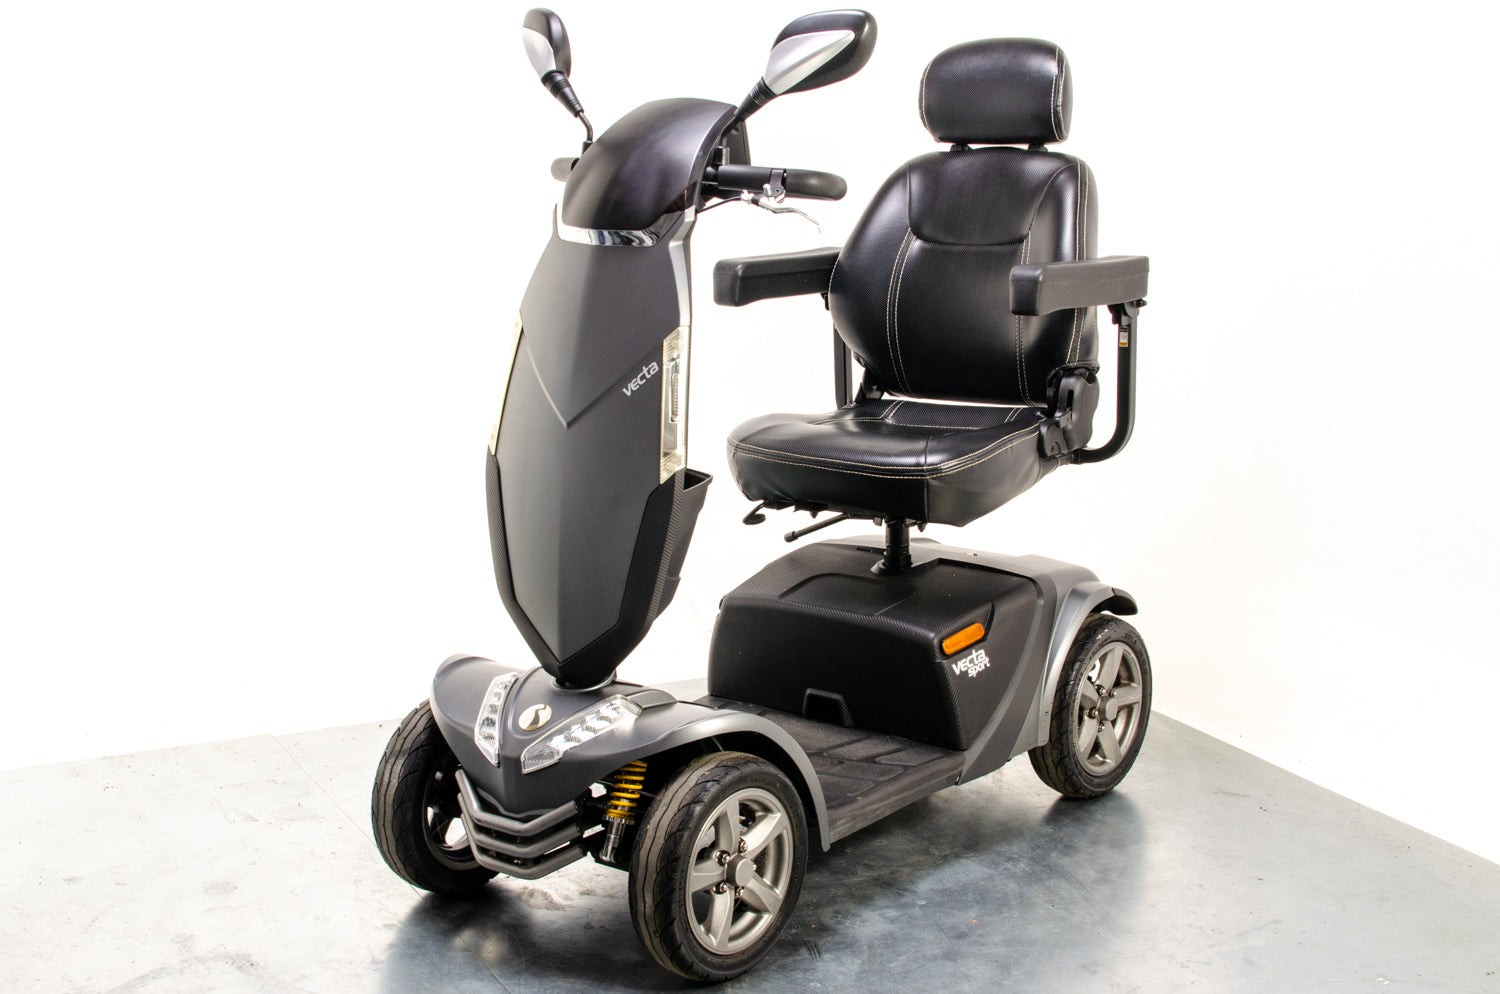 Rascal Vecta Sport Used Electric Mobility Scooter Fast Suspension Road Legal All-Terrain Grey 13320